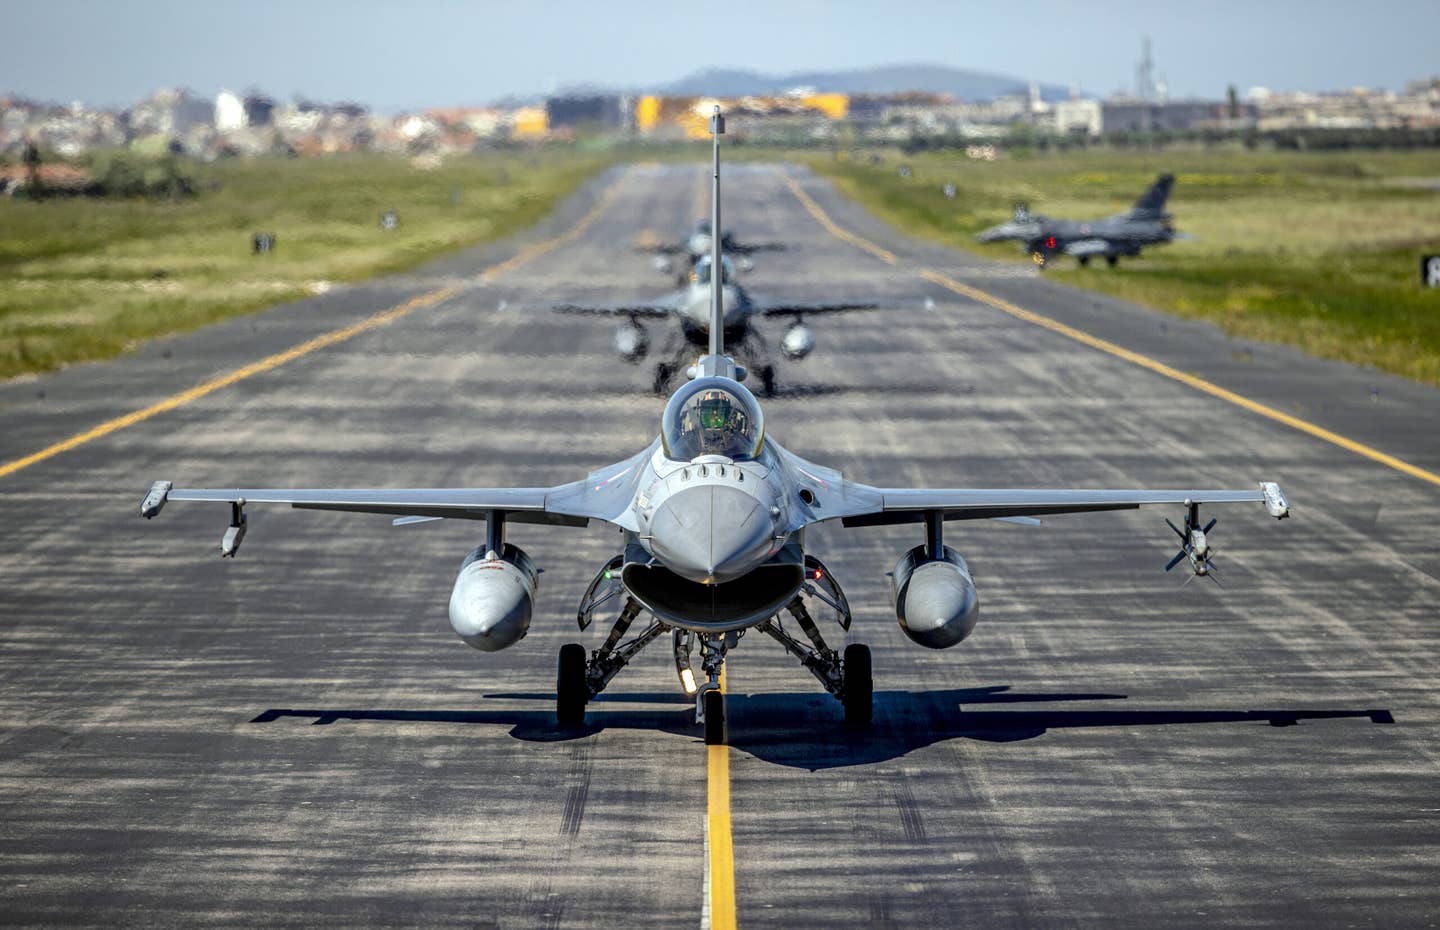 Turkish Air Force F-16 fighters on the runway at the air base of Balikesir, Turkey on May 22, 2022. <em>Photo by Ali Atmaca/Anadolu Agency via Getty Images</em>